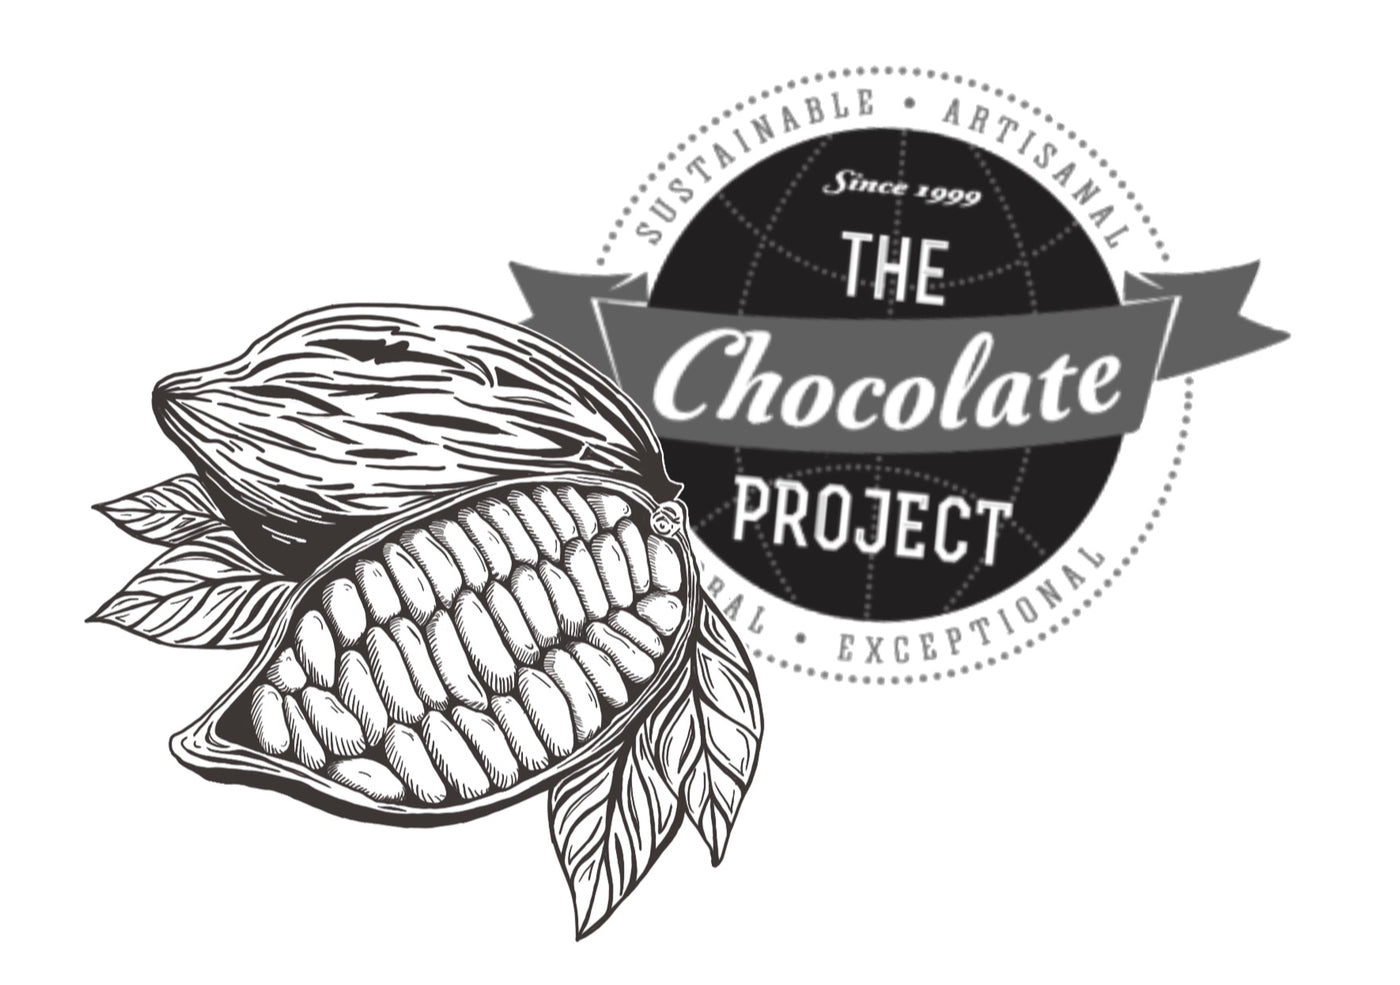 Chocolate Masterclass- Cacao 101 An Introduction to Craft Chocolate on Saturday, September 30 at 1:00 pm